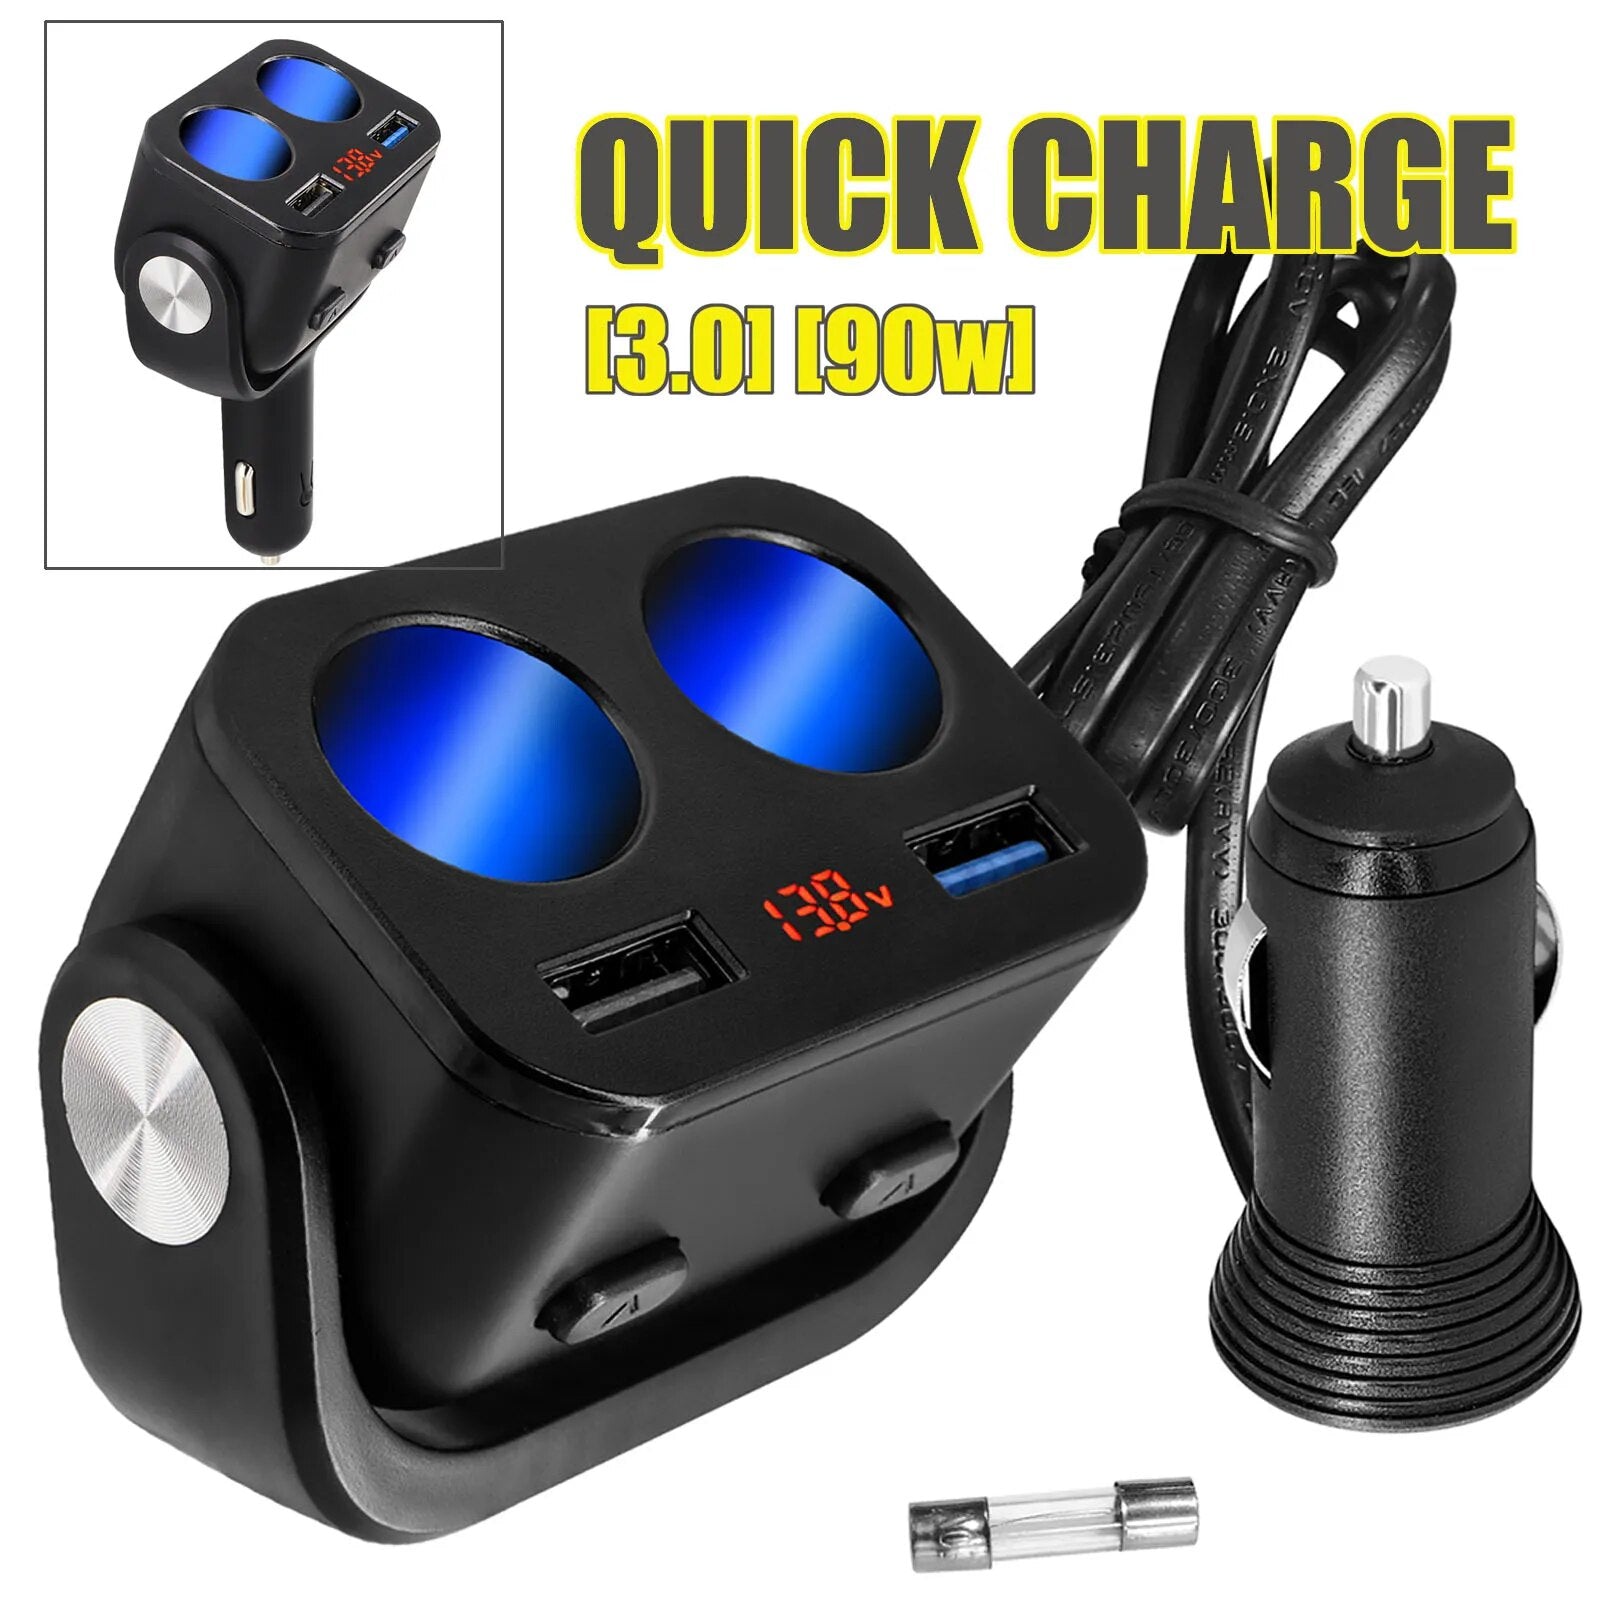 Car Cigarette Lighter Socket Extension Cord Cable USB QC3.0 Quick Charge Power Adapter Plug Phone ipad Charger Splitter Outlet